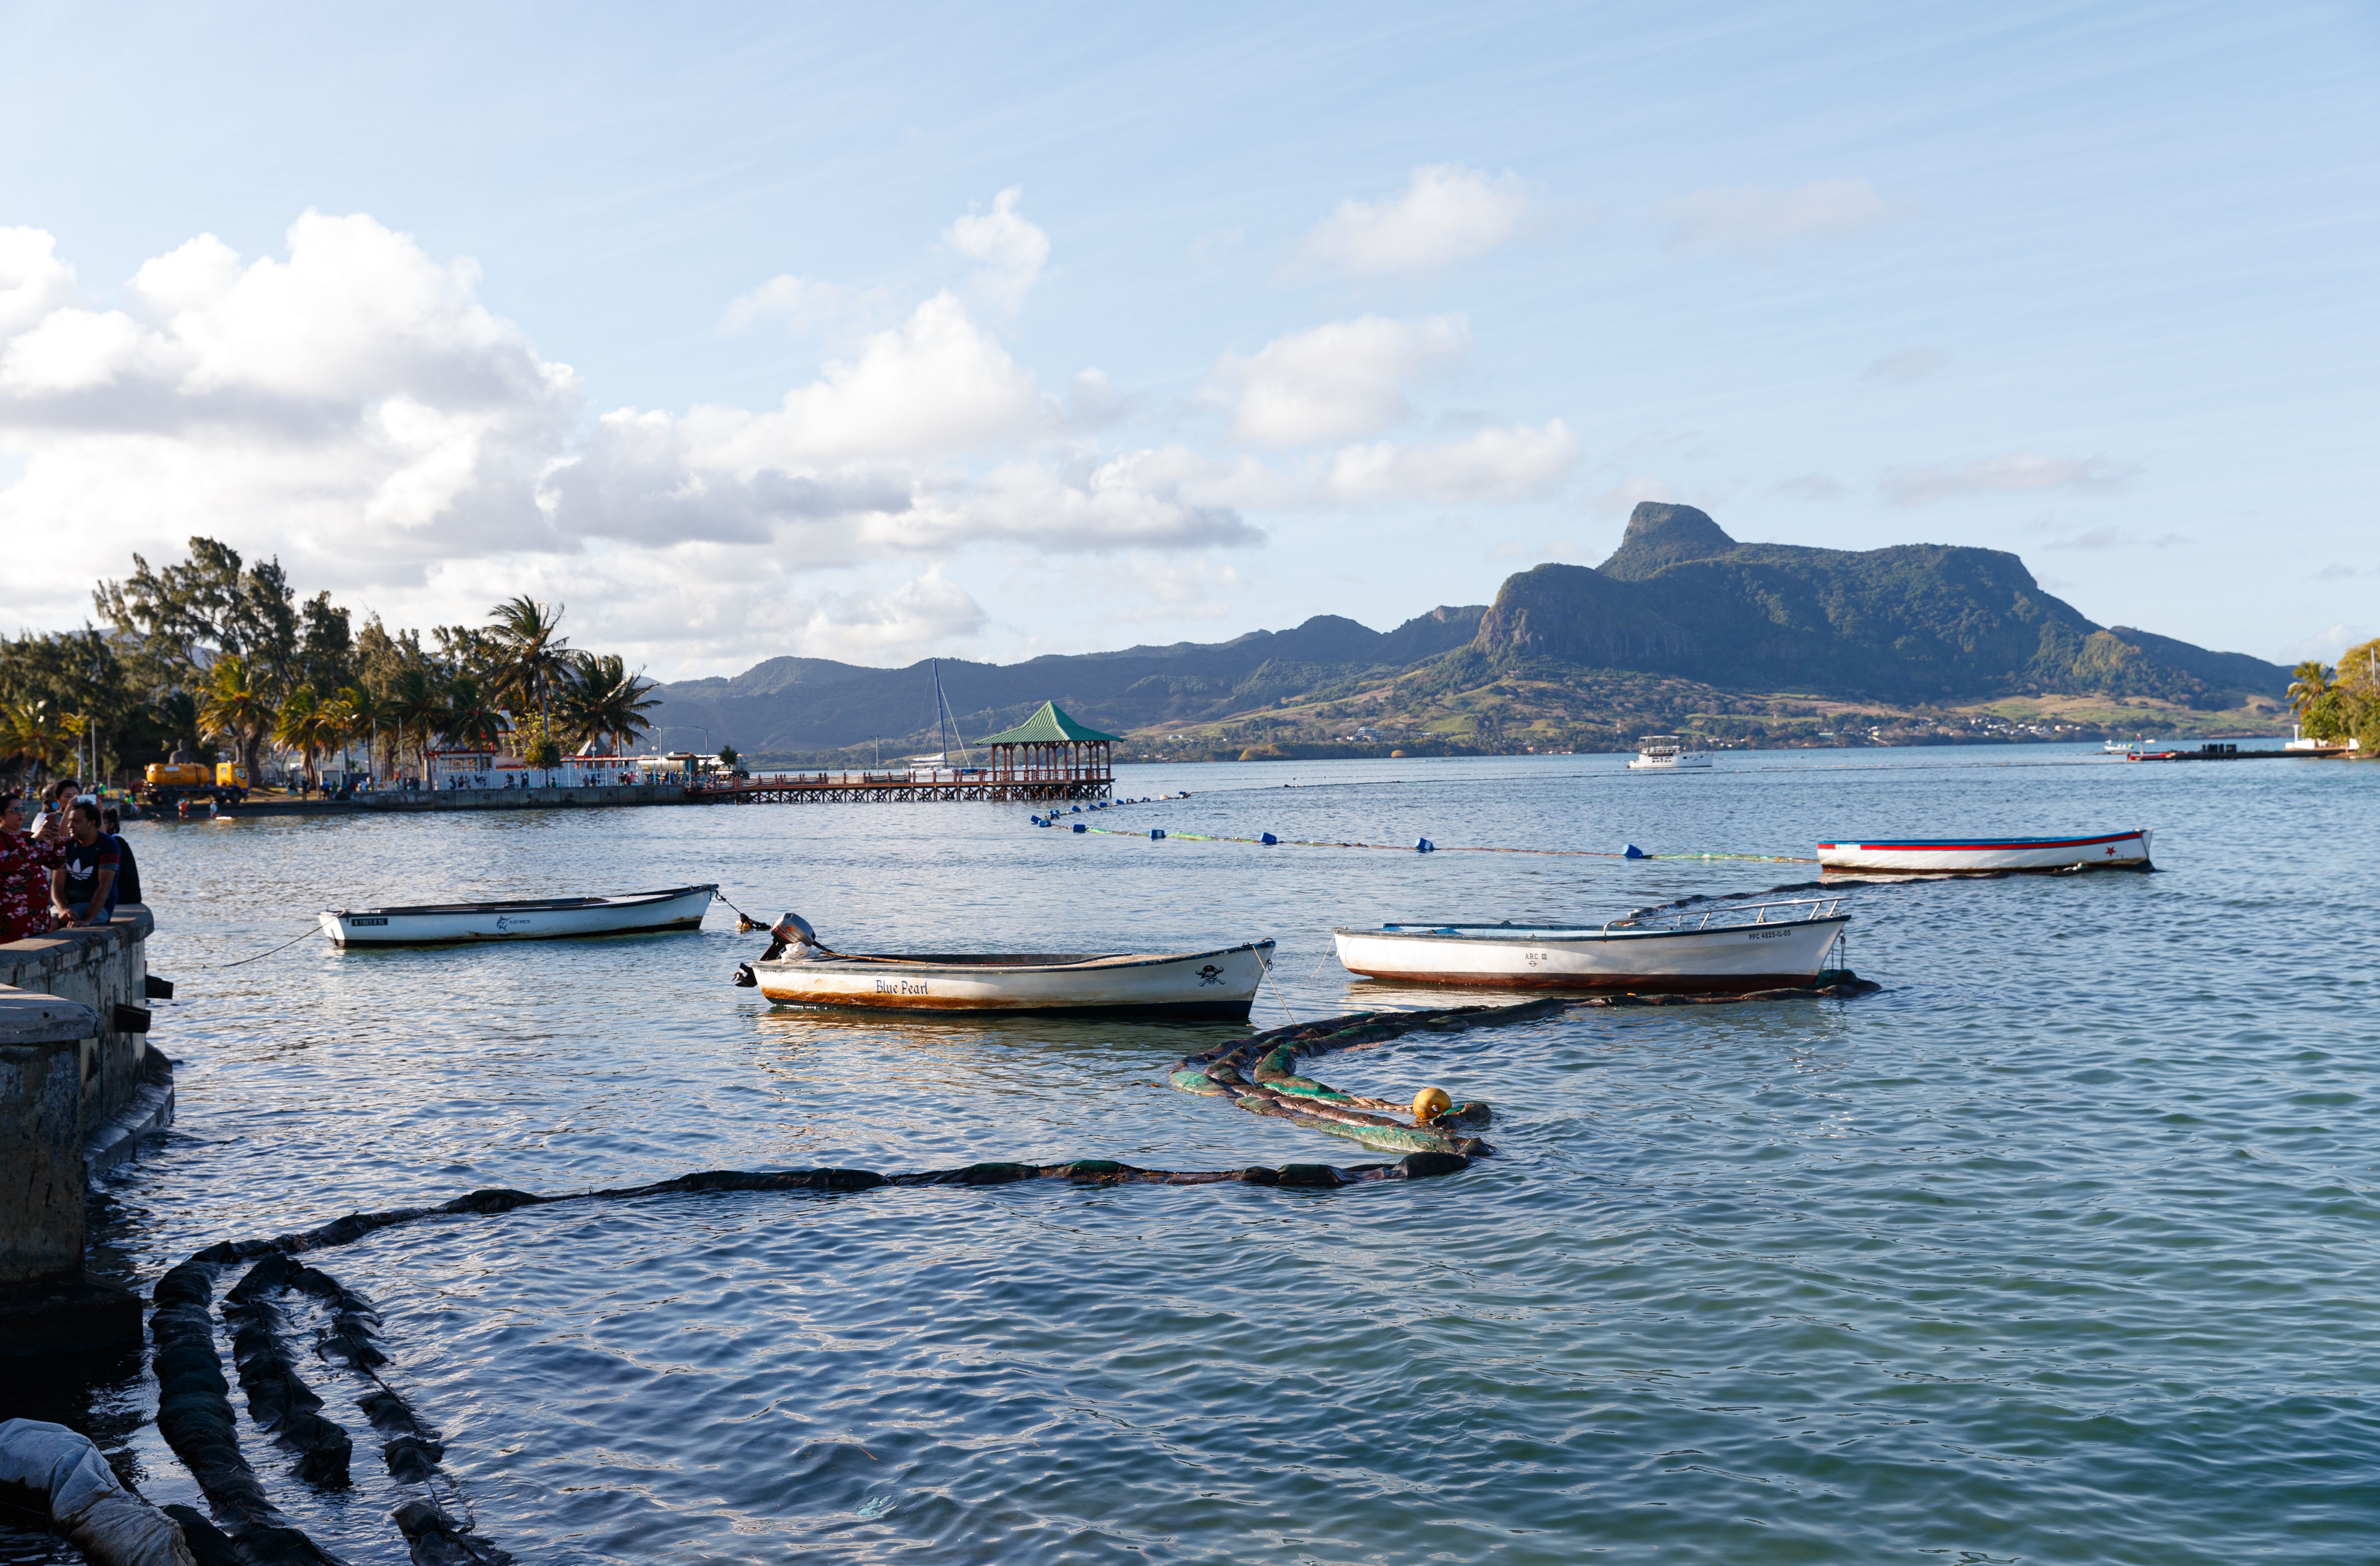 People in Mauritius are wary that the move will give authorities undue power to snoop